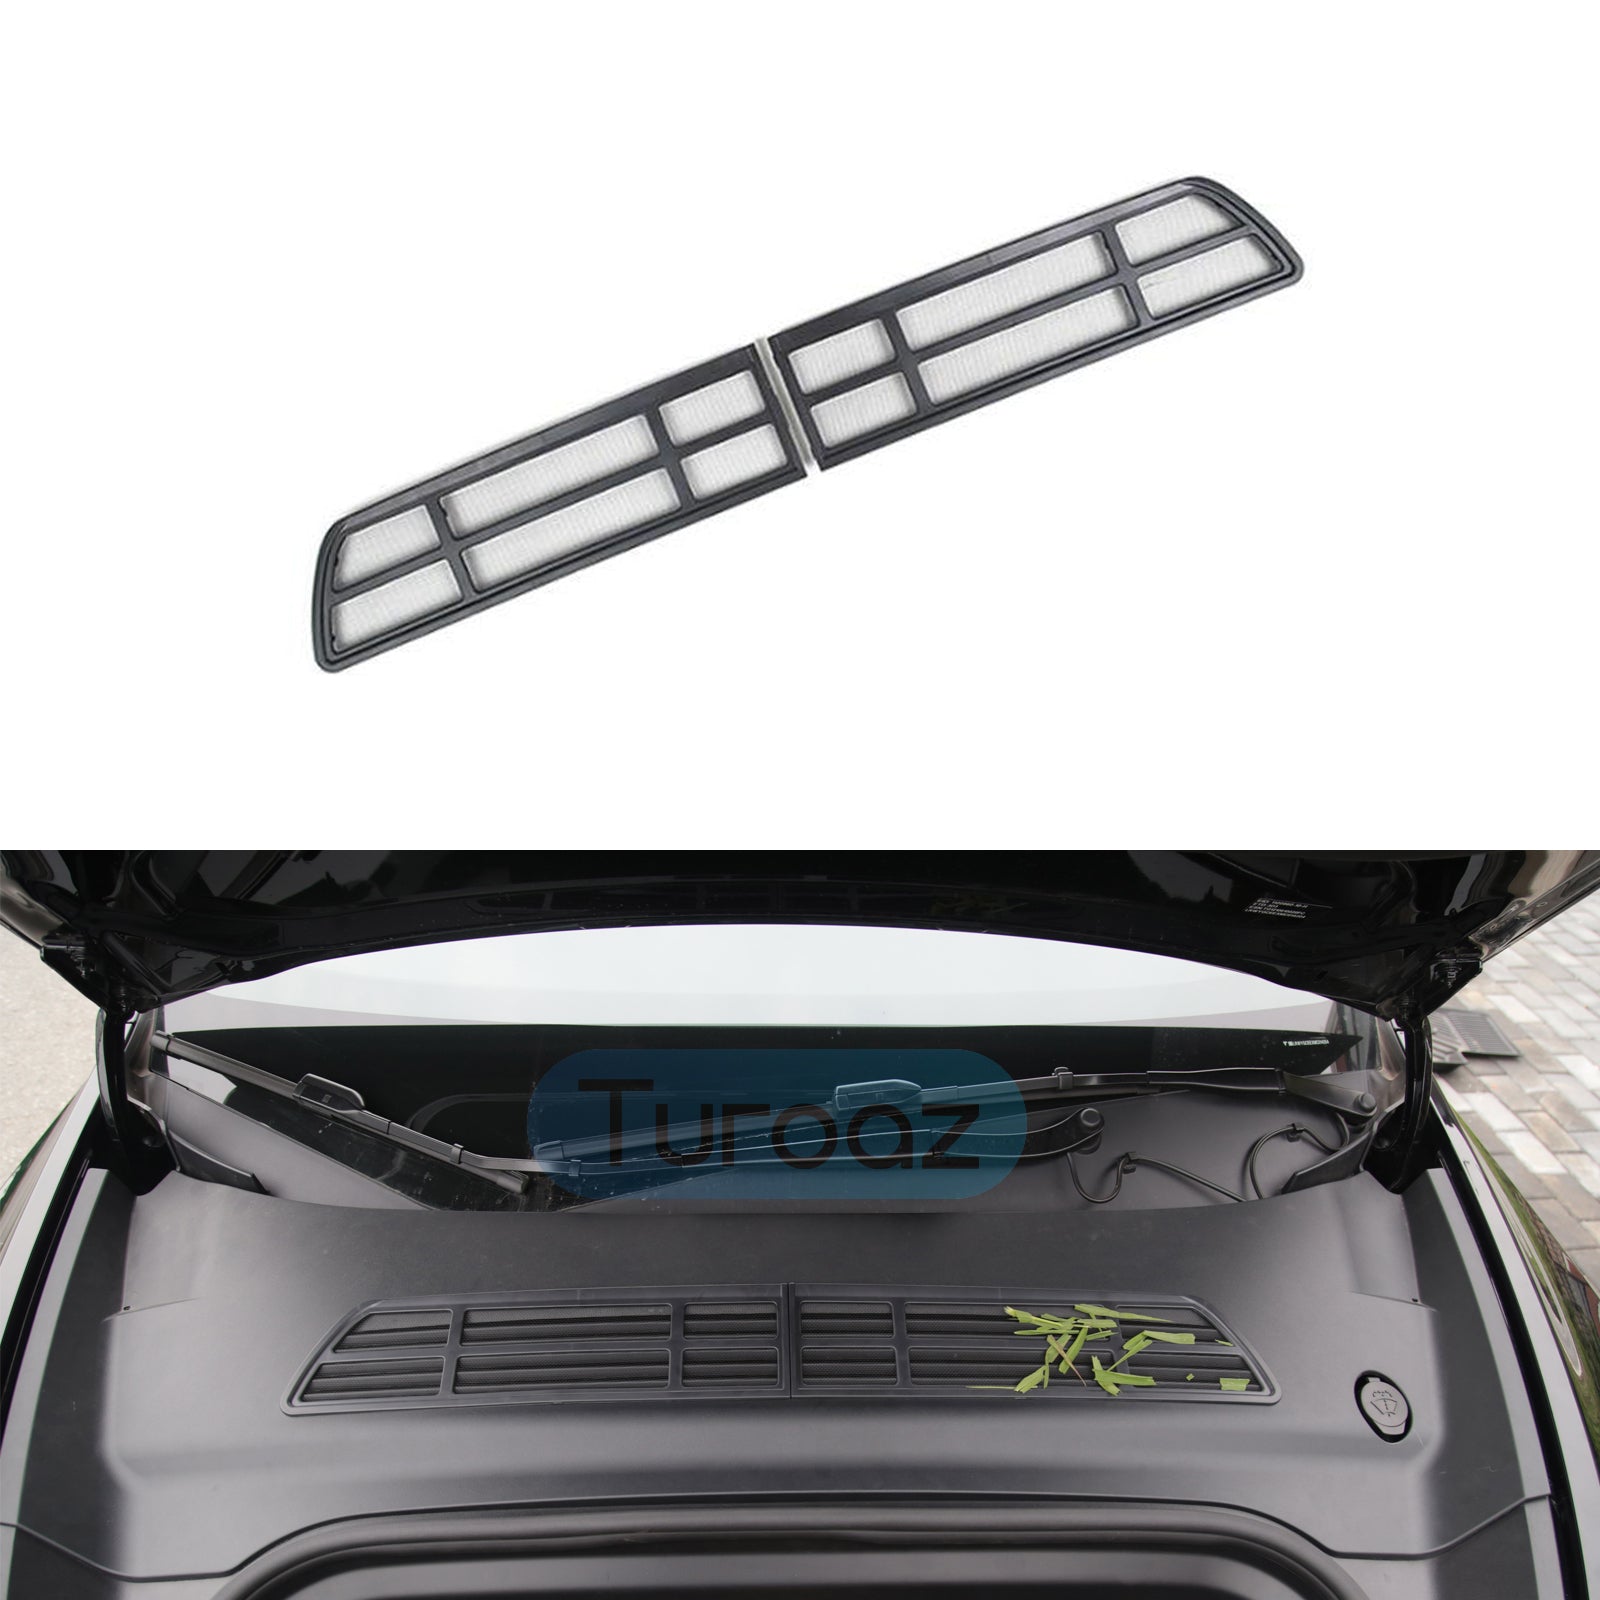 Car Air Vent Cover, Car Ventilation Grille Cover for Tes-la Model 3 2021  Air Intake Protection Net Air Conditioning Protection 